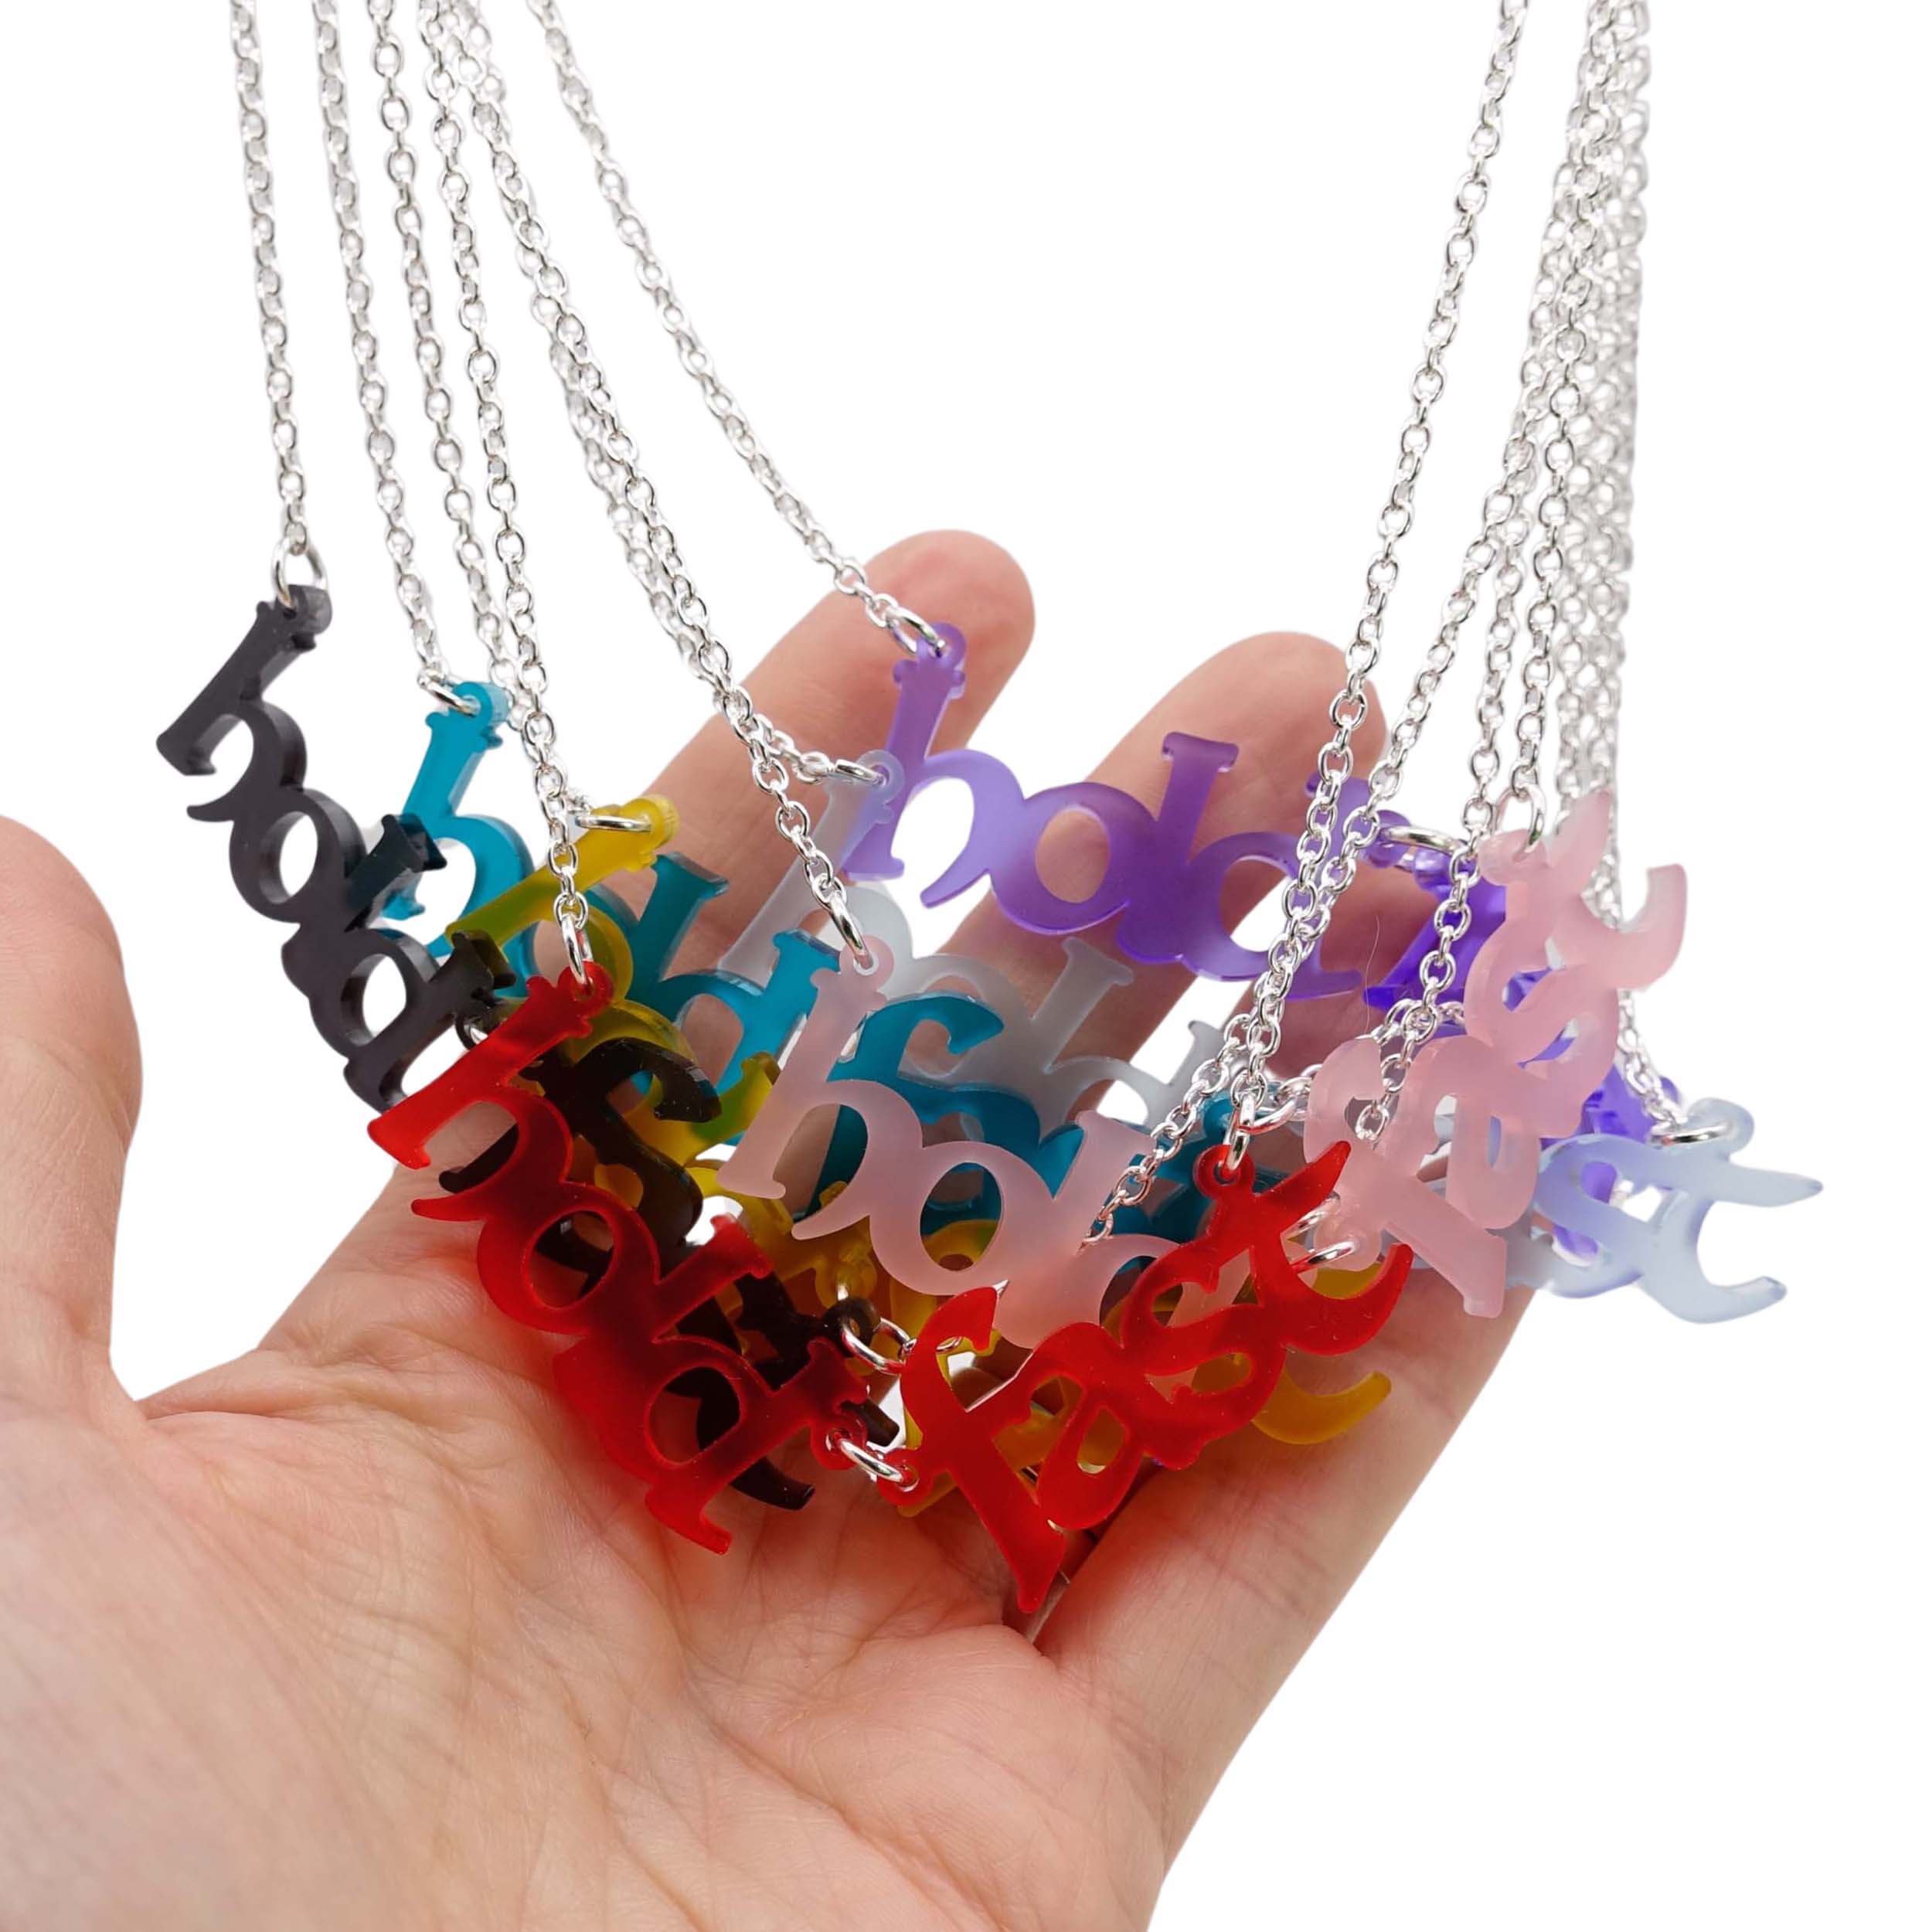 A group of Hold Fast necklaces in seven different frost colours, shown hanging together with a hand for scale. 